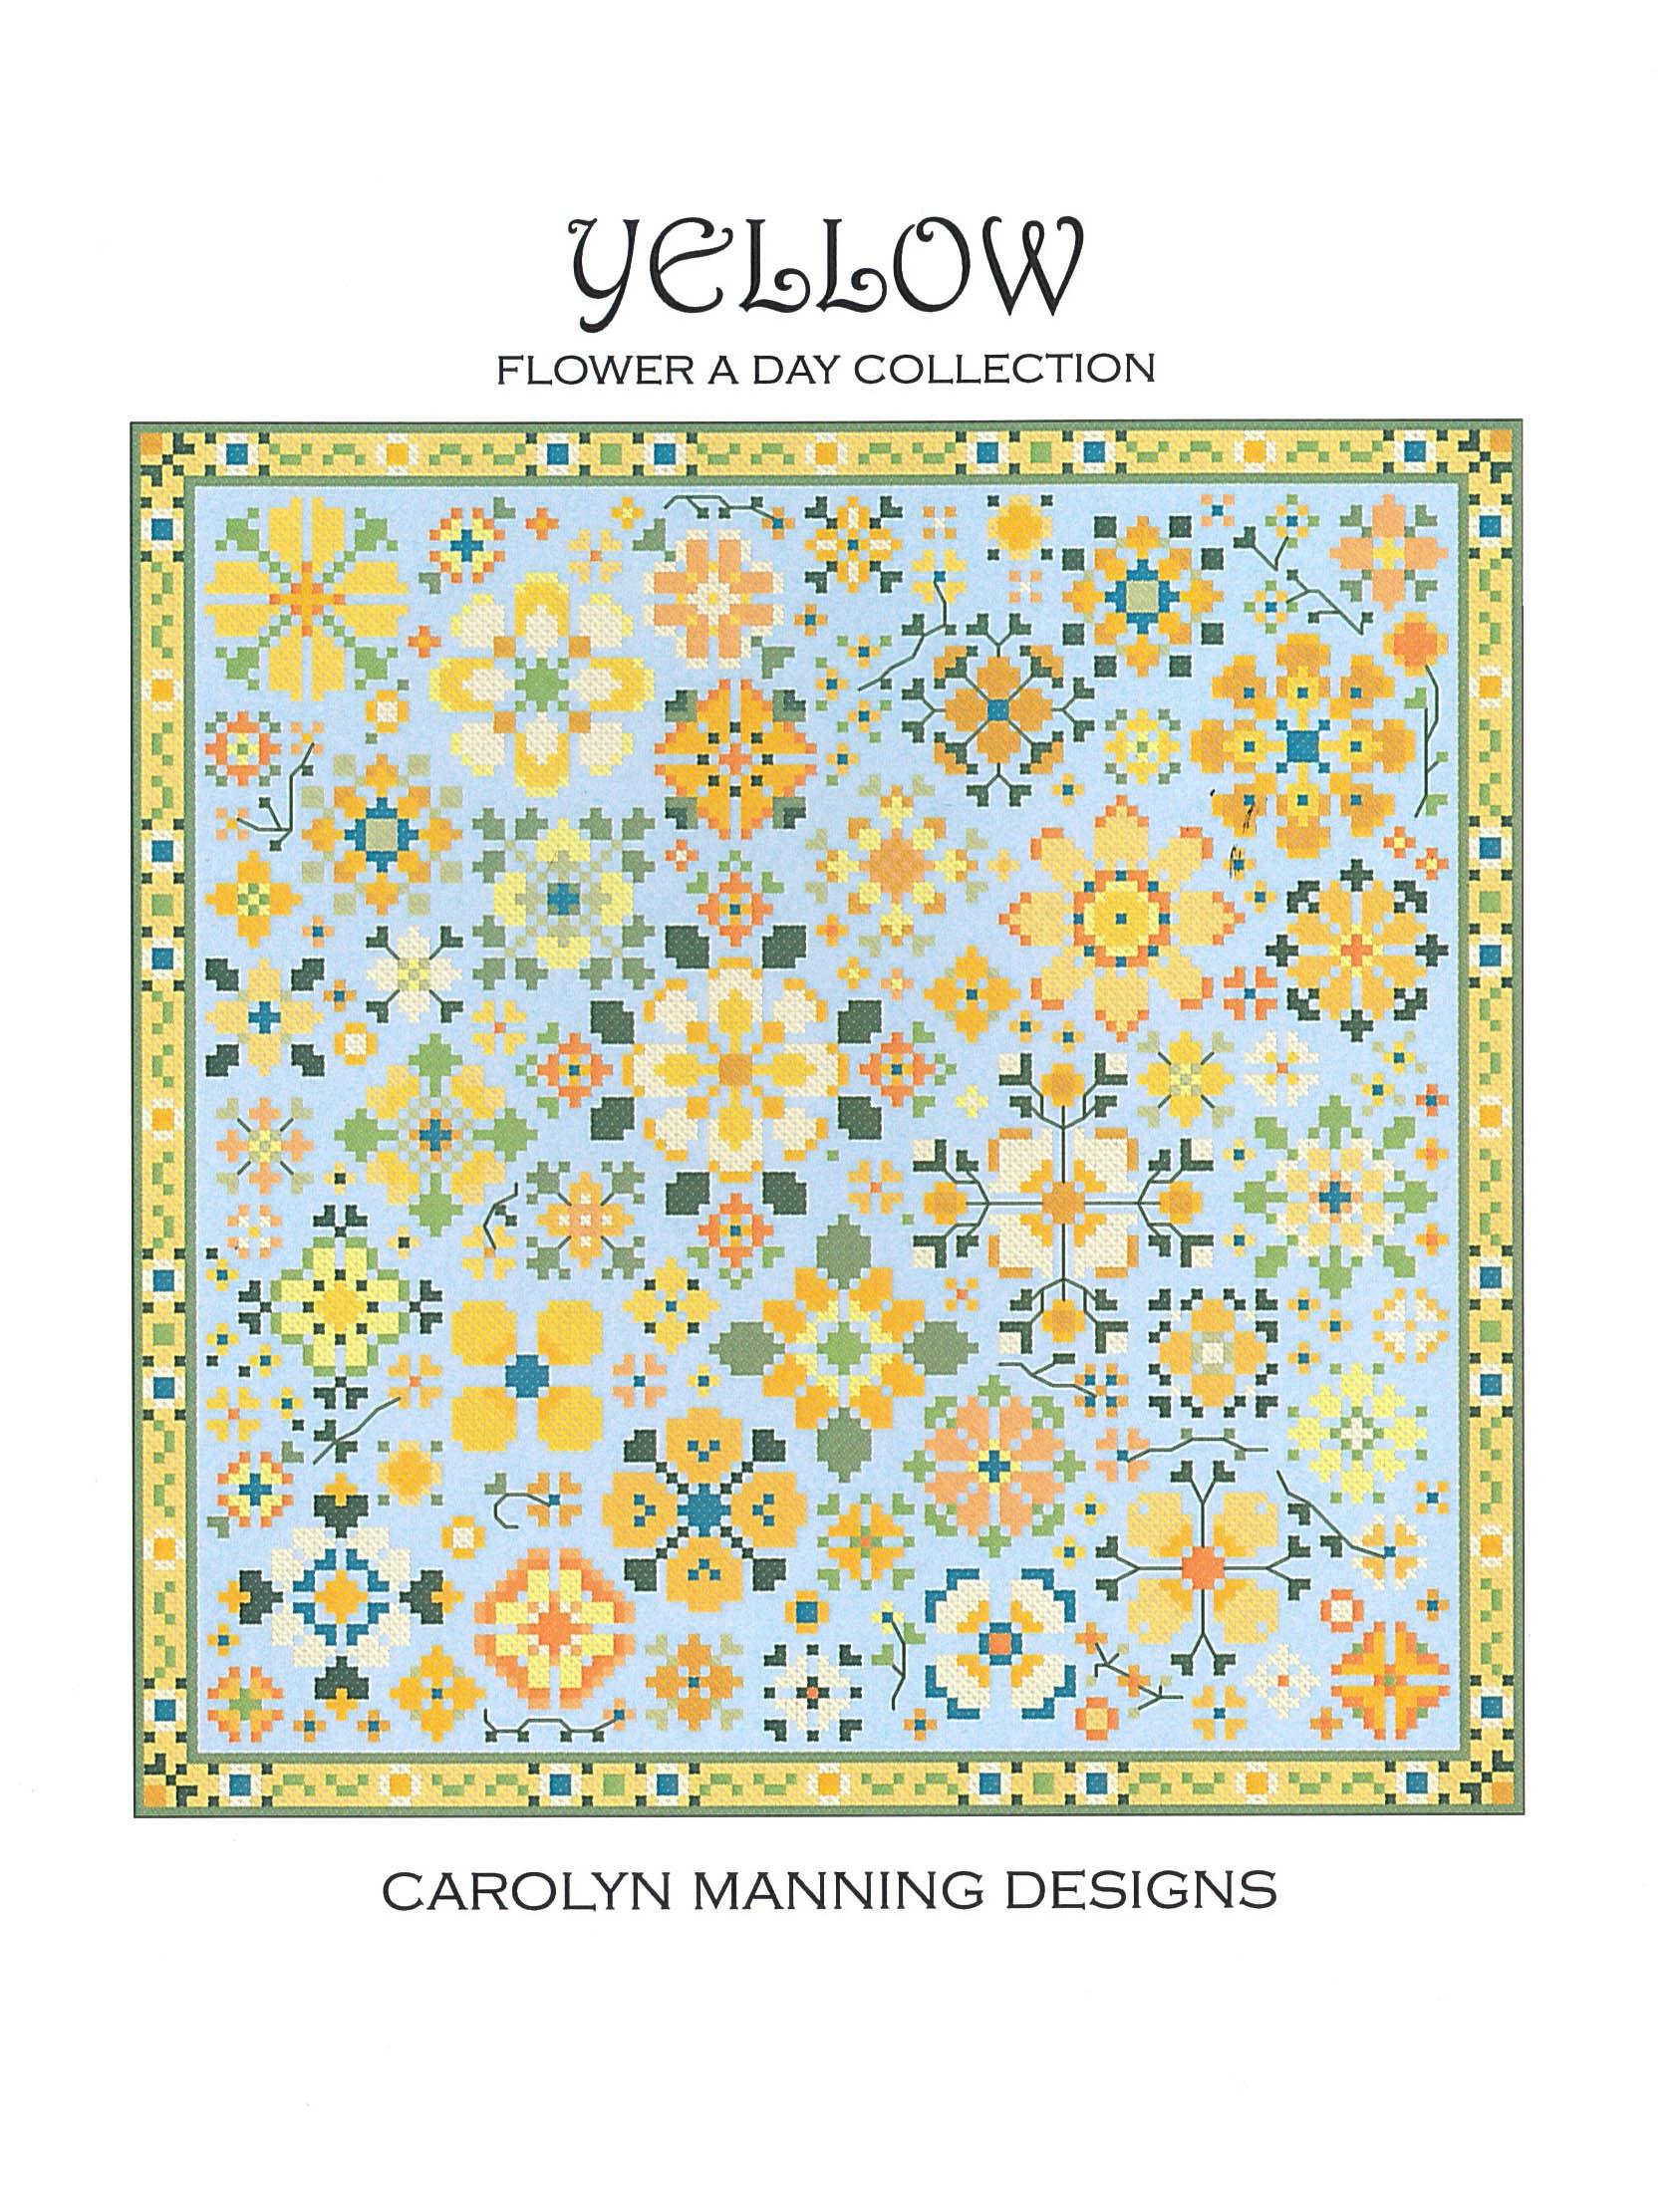 CM Designs-Yellow-Flower A Day